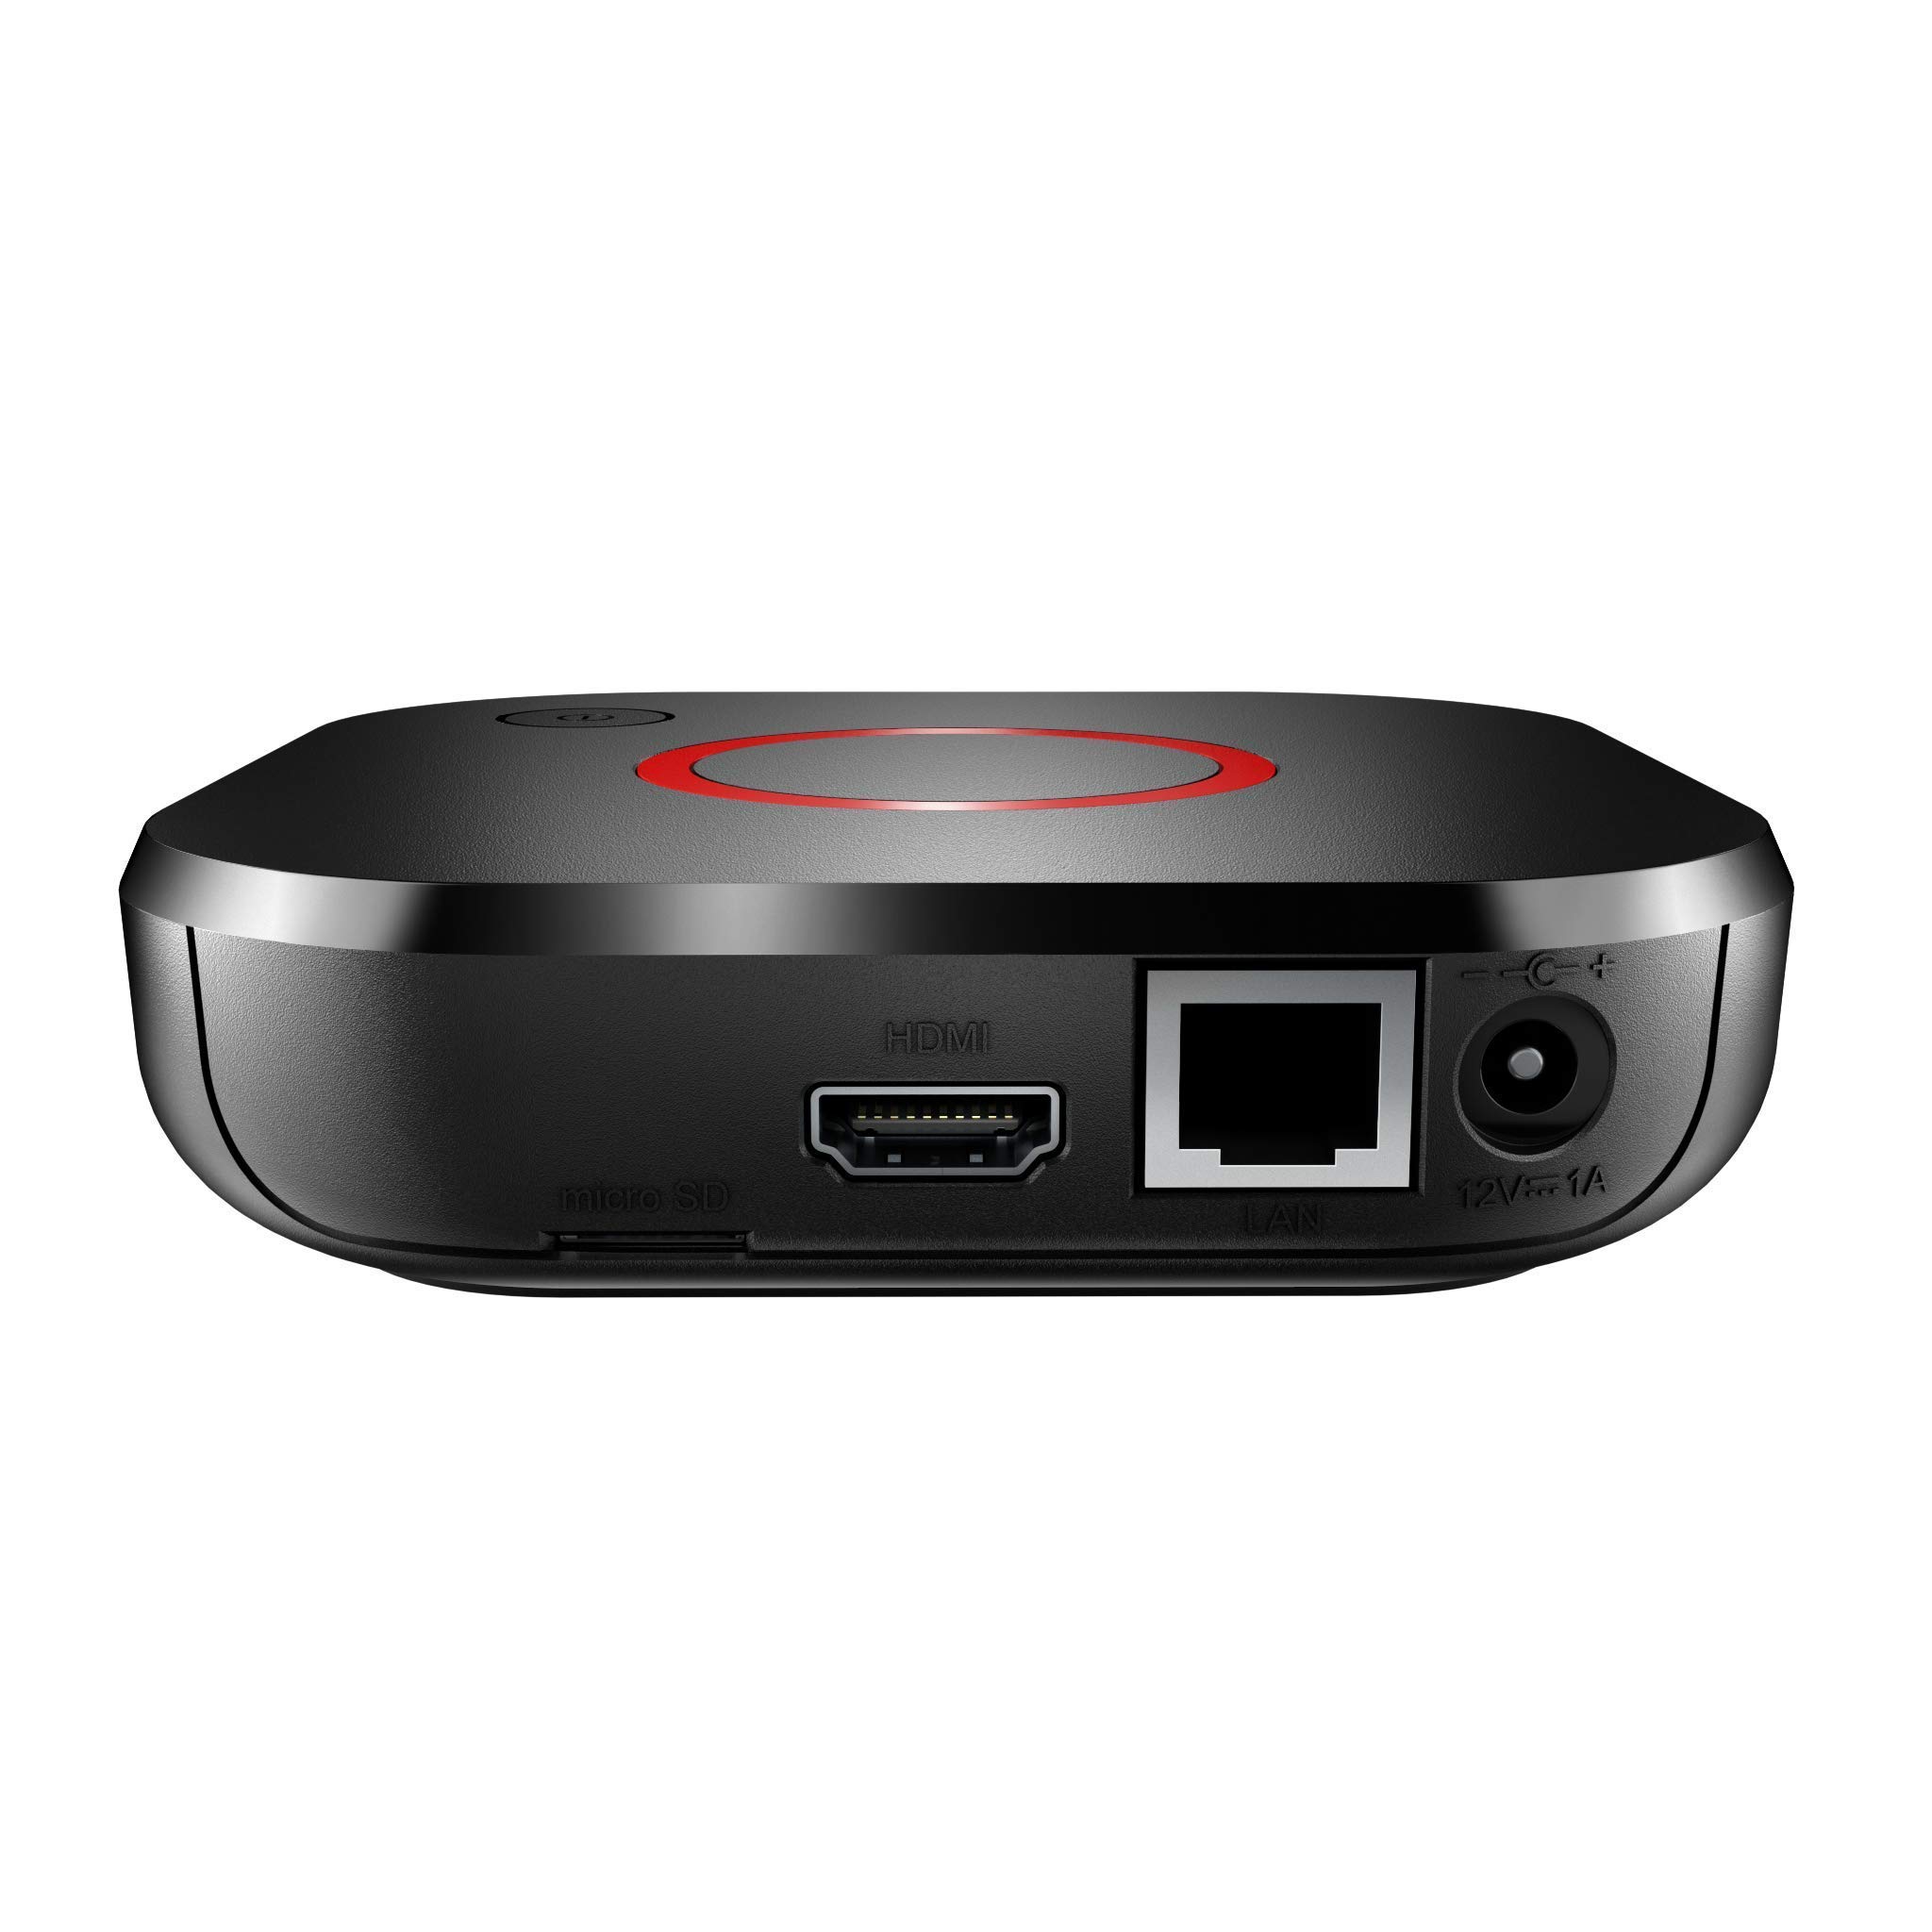 Infomir Mag 424 W3 (Mag 424W3) 4K 2160P Hevc 600Mbps Built-in Dual Band WiFi, Bluetooth, HDMI Cable 1 GB RAM, 8 GB eMMC (Faster than Mag 324w2 322W1)